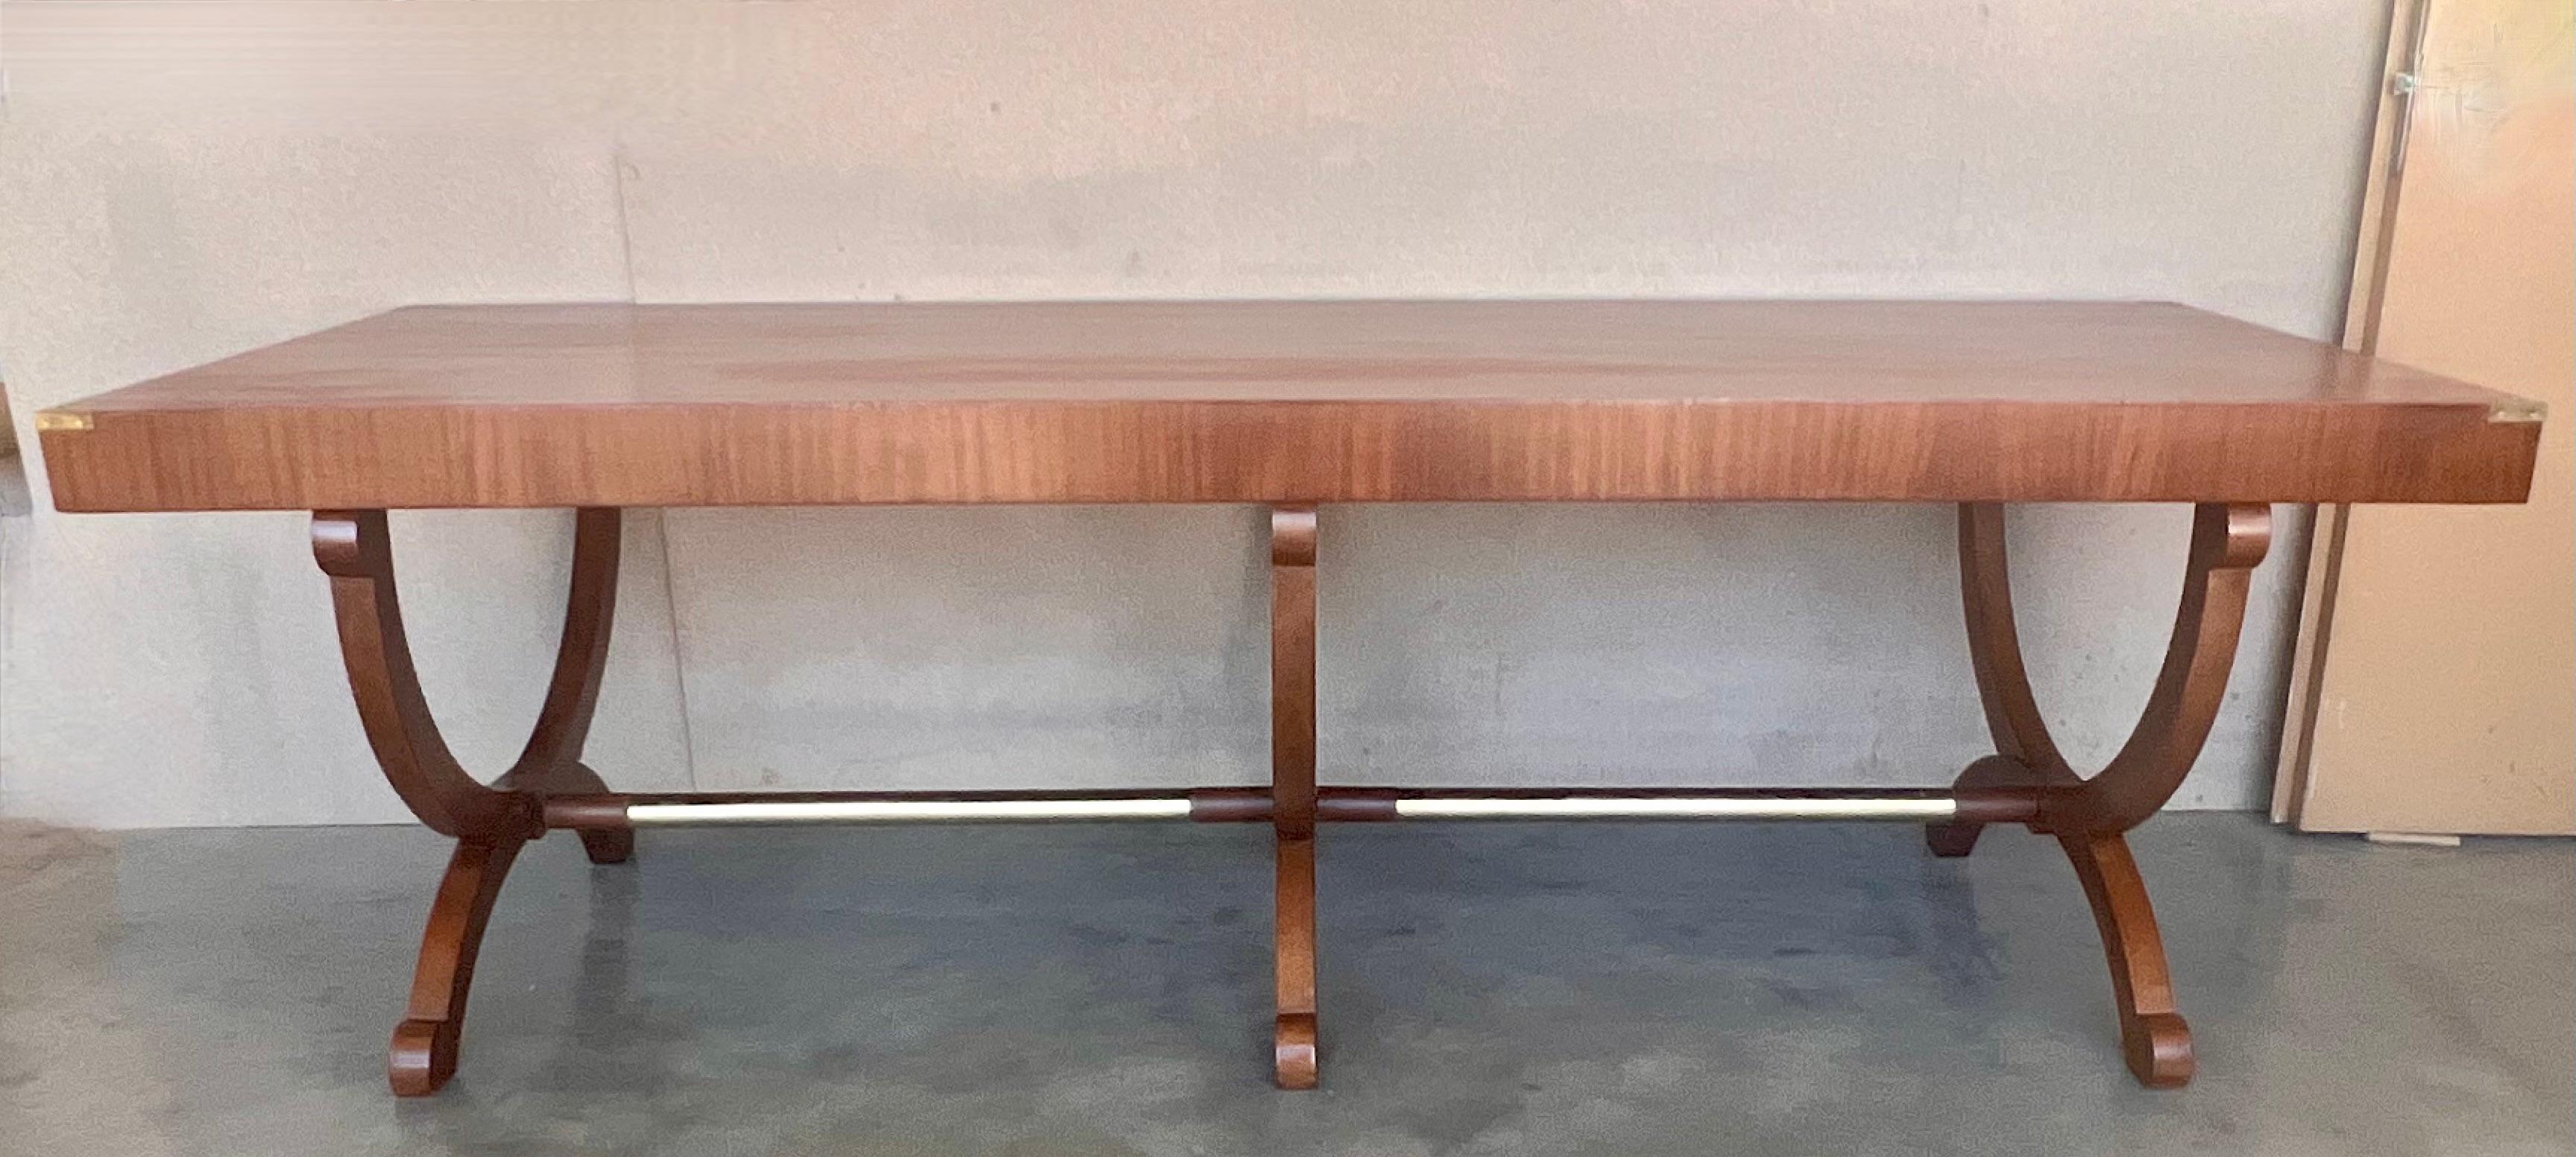 This table was manufactured in France circa 1930 and is a versatile table that can be used as an occasional dining table, hall table or desk  The top is supported by lyre shaped end supports joined by a stretcher.  
The finished is really beautiful,